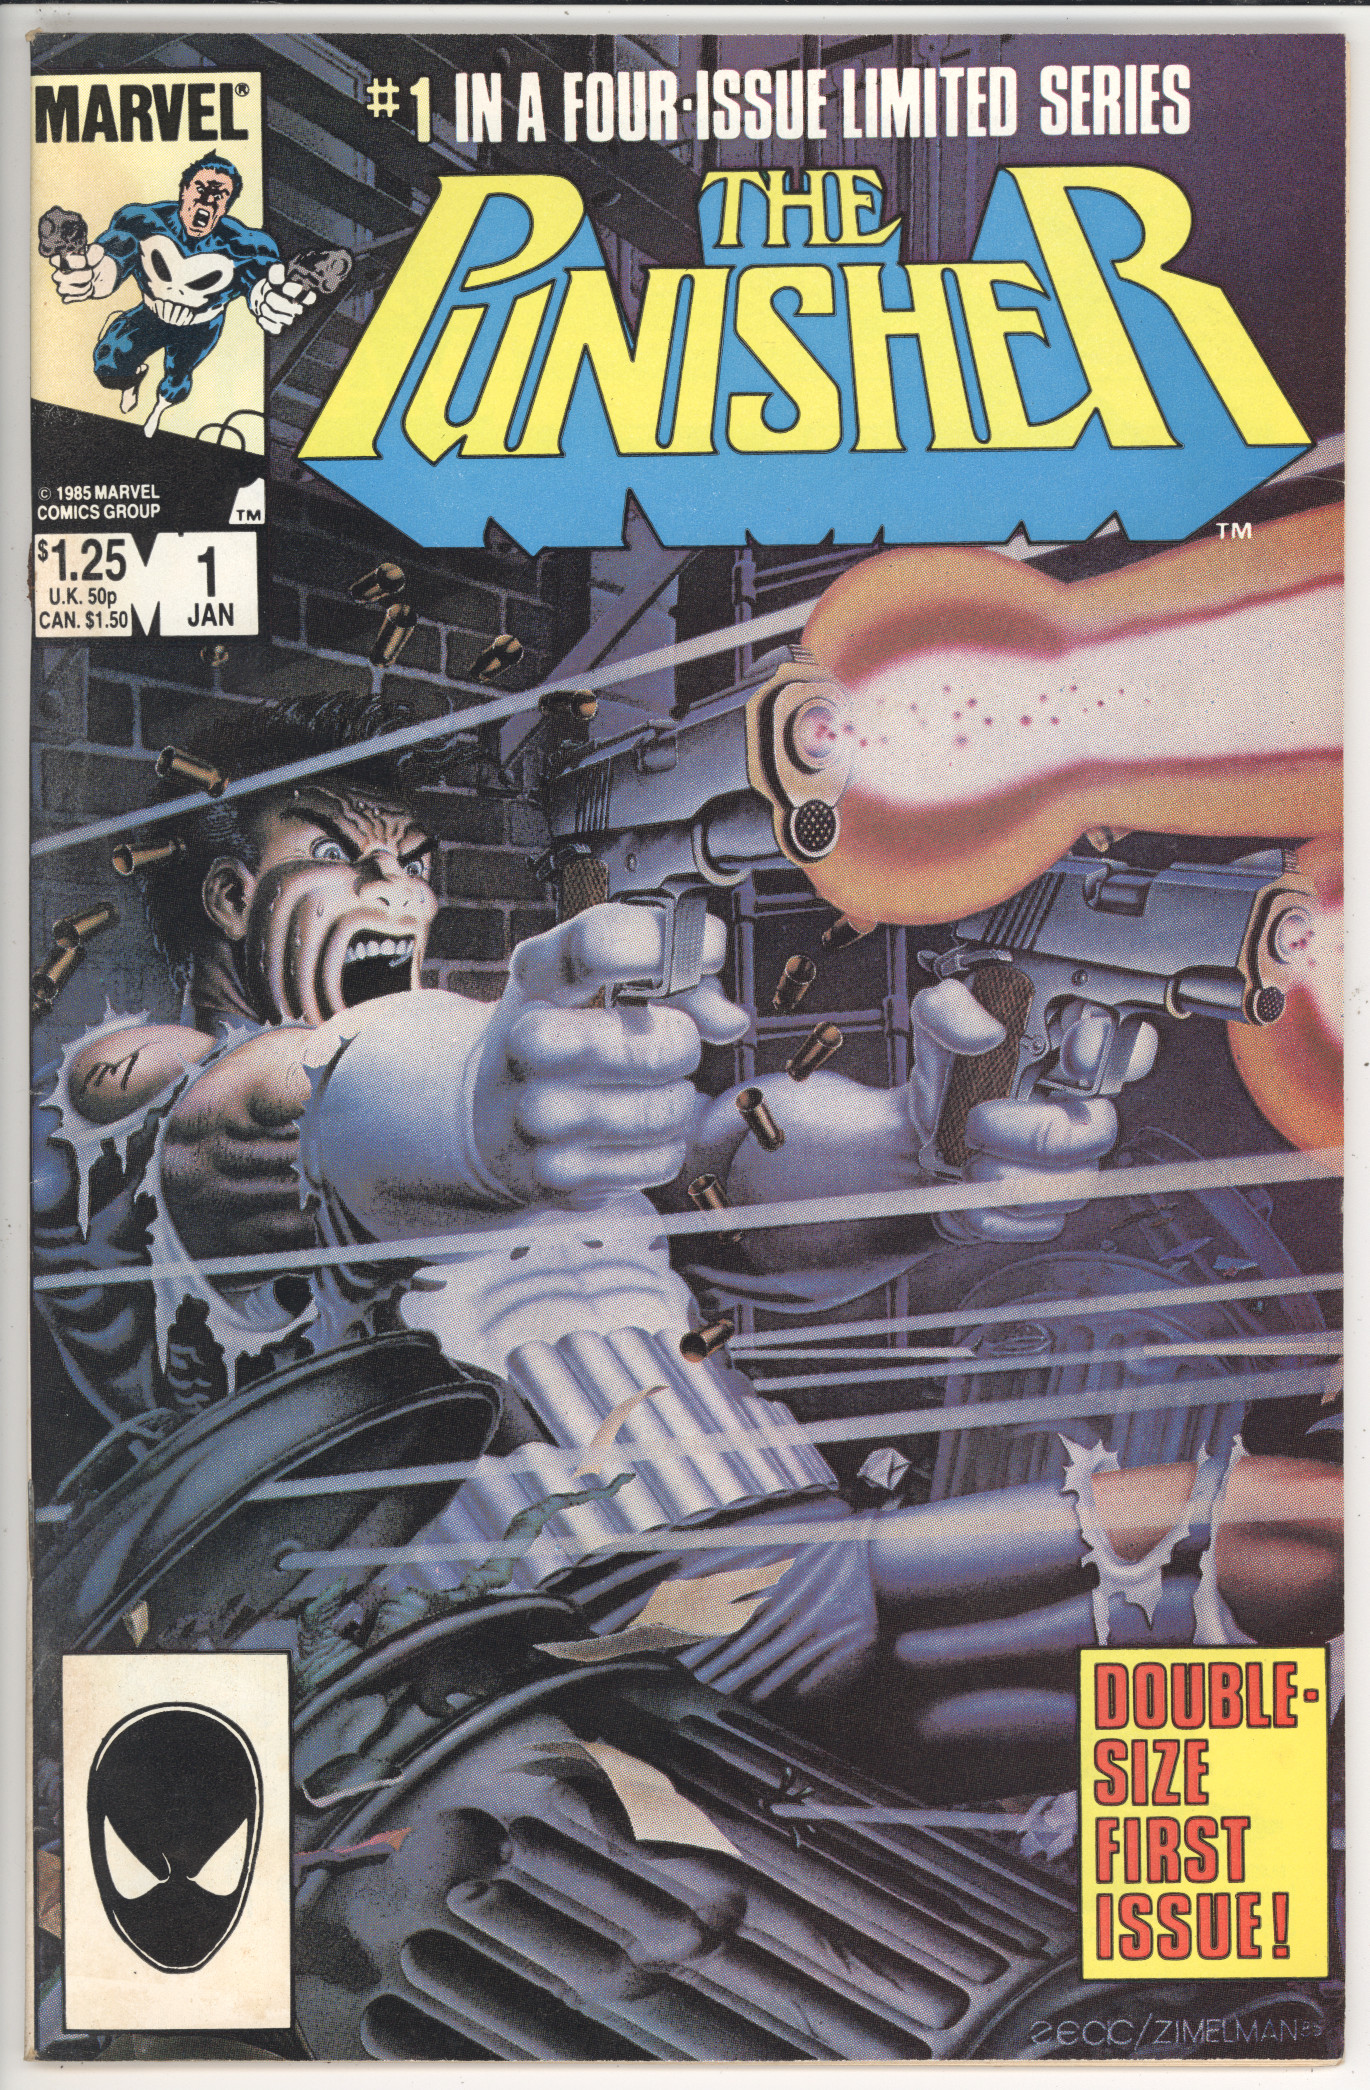 Punisher Limited Series   #1